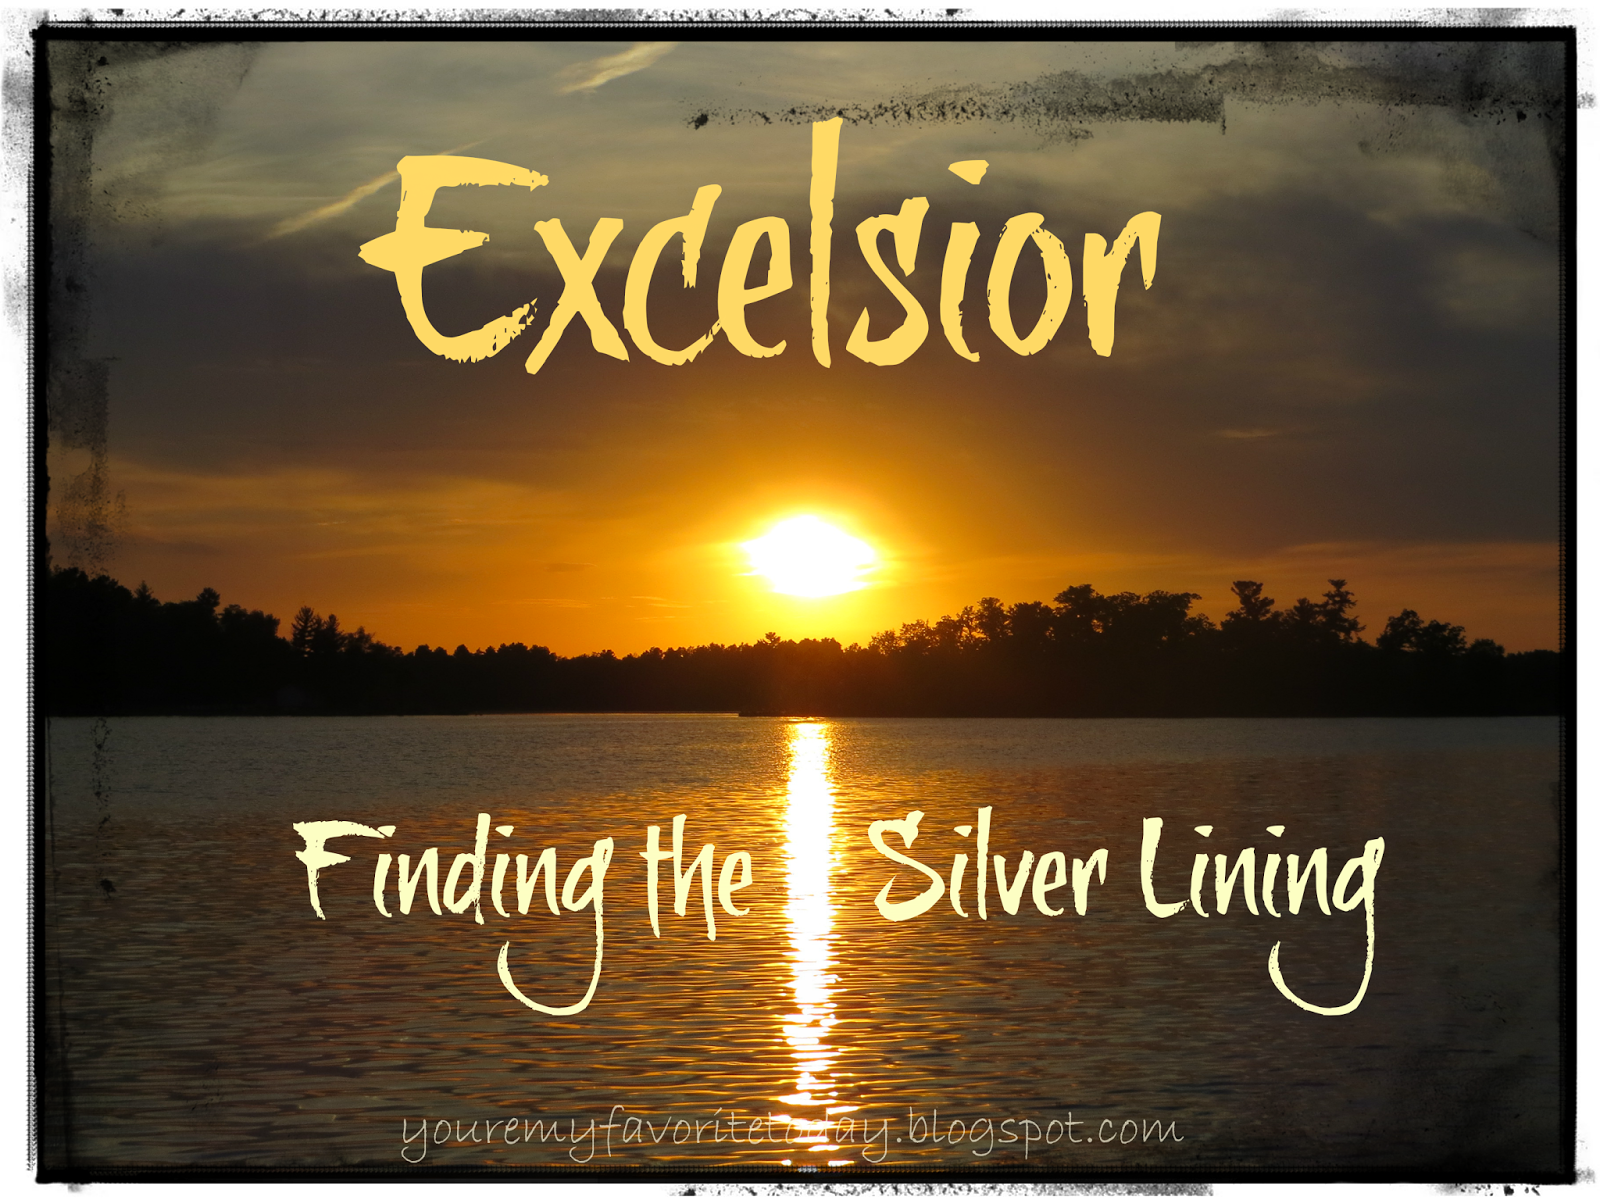 Excelsior Silver Linings Playbook Quotes Quotesgram